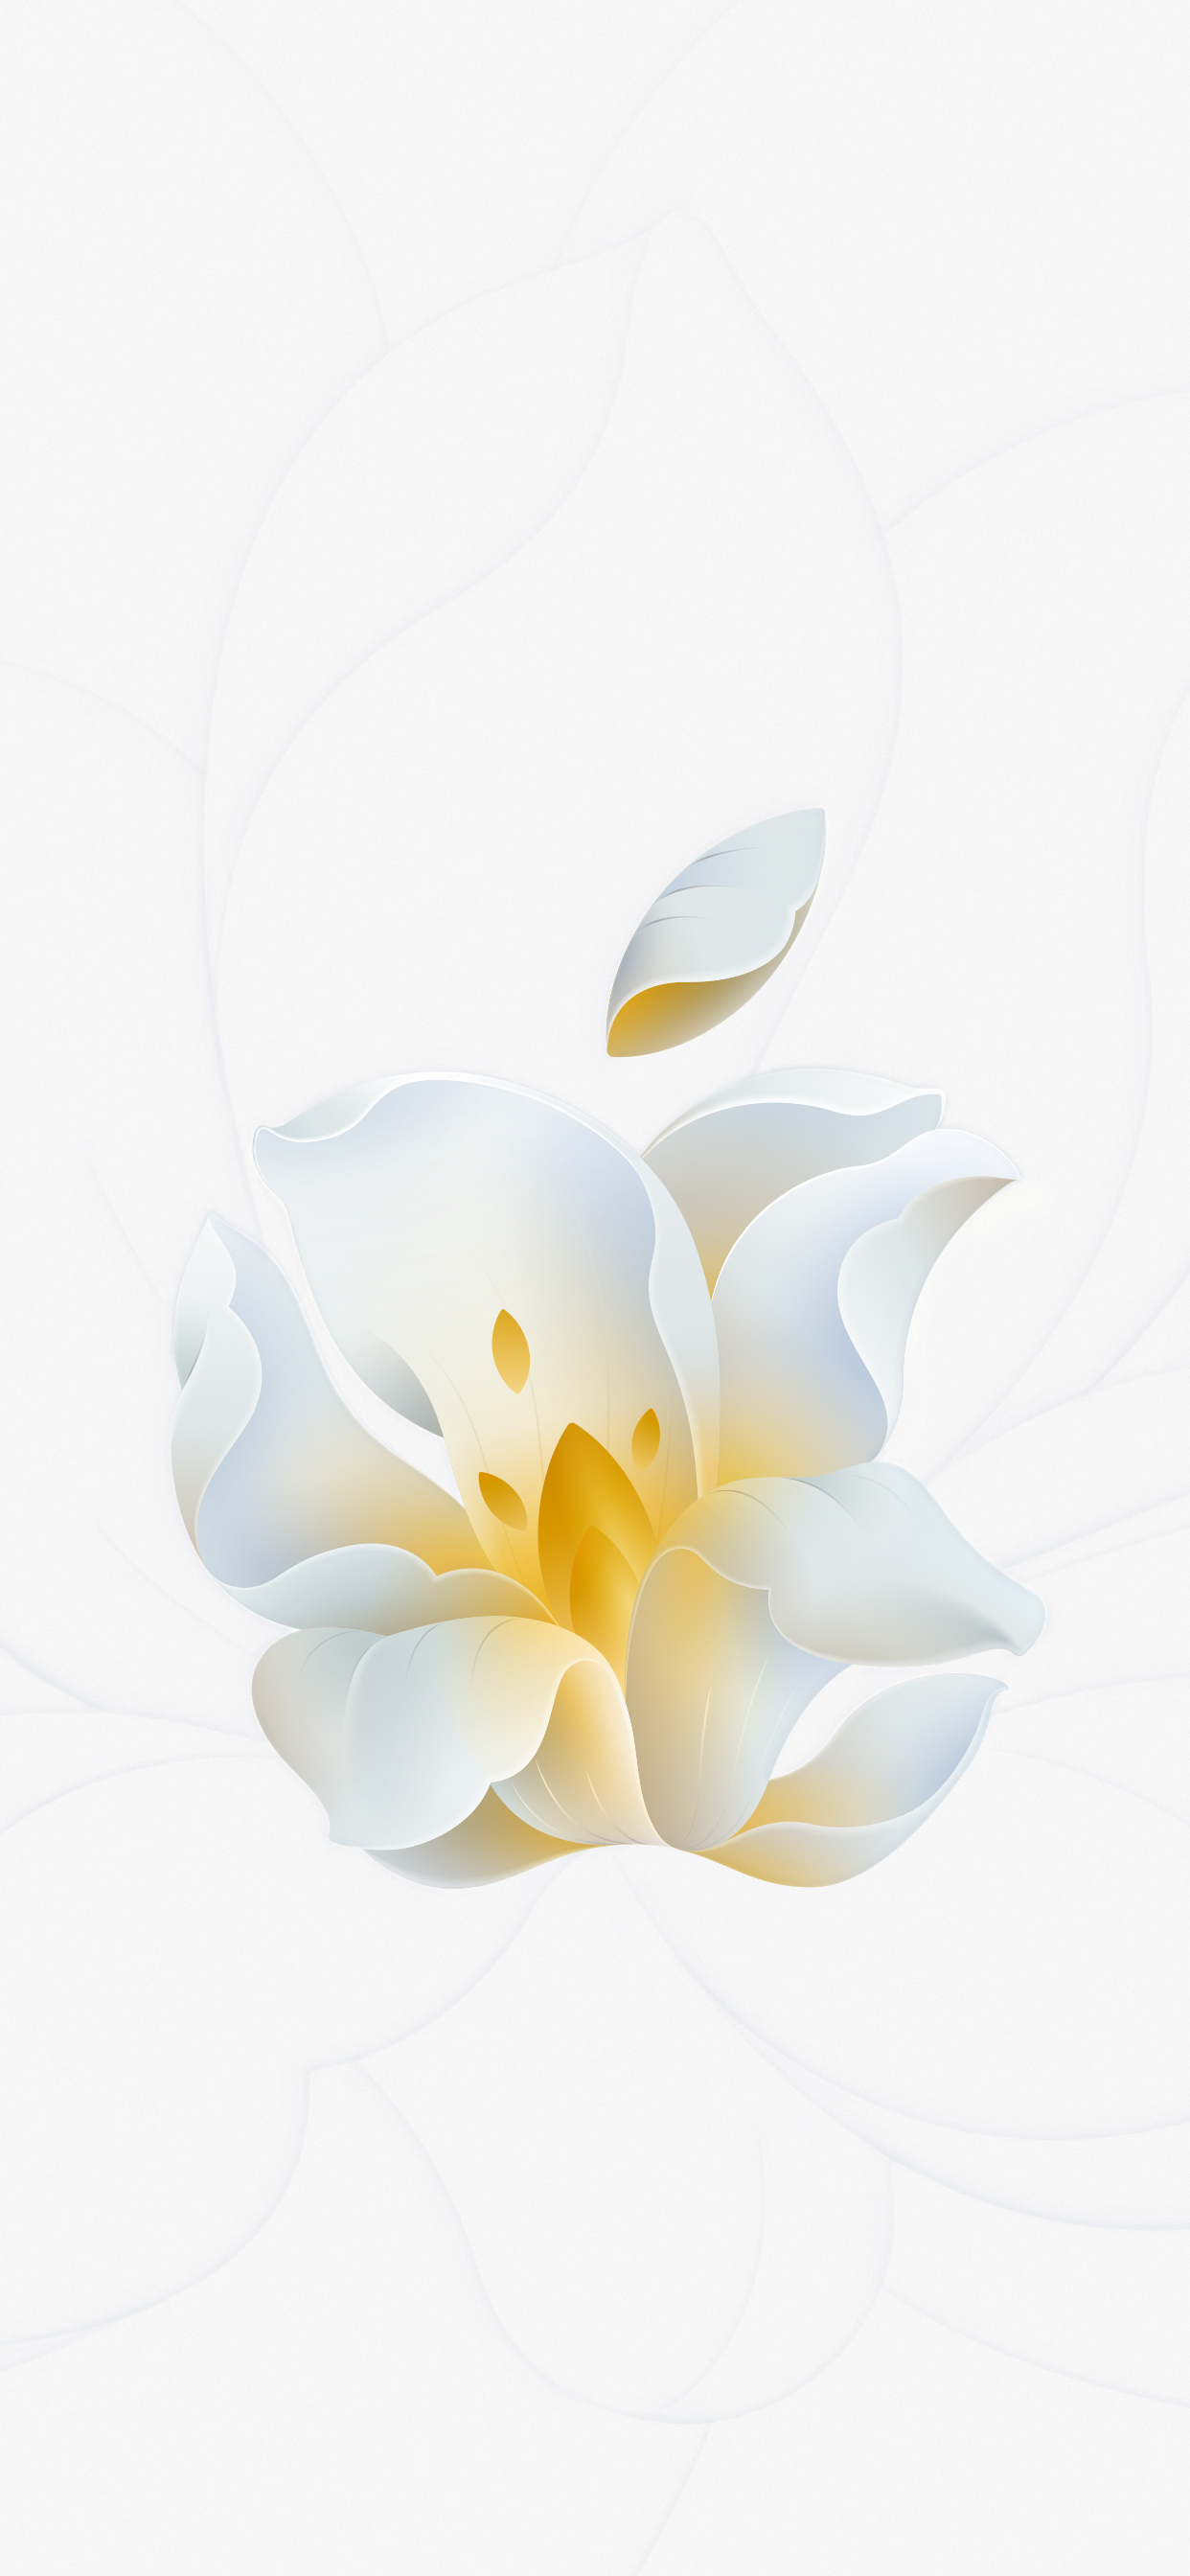 Apple Releases New Wallpaper to Celebrate Upcoming Jing&#039;an Retail Store in Shanghai